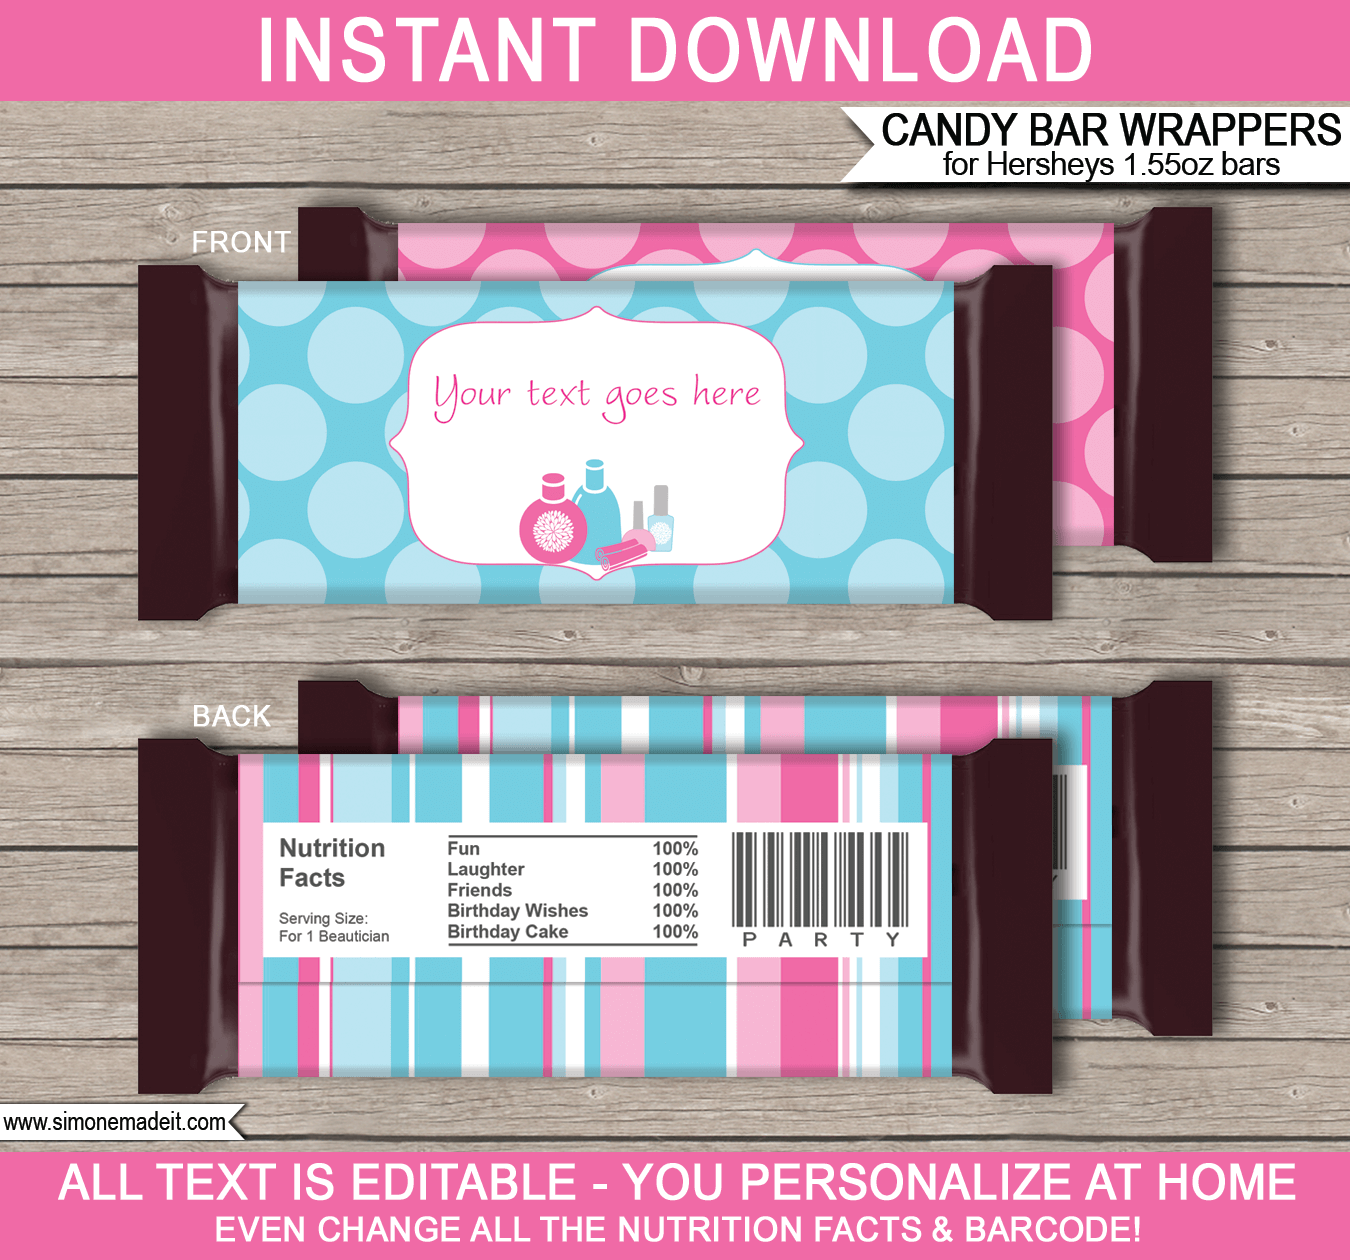 Spa Party Hershey Candy Bar Wrappers | Birthday Party Favors | Personalized Candy Bars | Editable Template | INSTANT DOWNLOAD $3.00 via simonemadeit.com